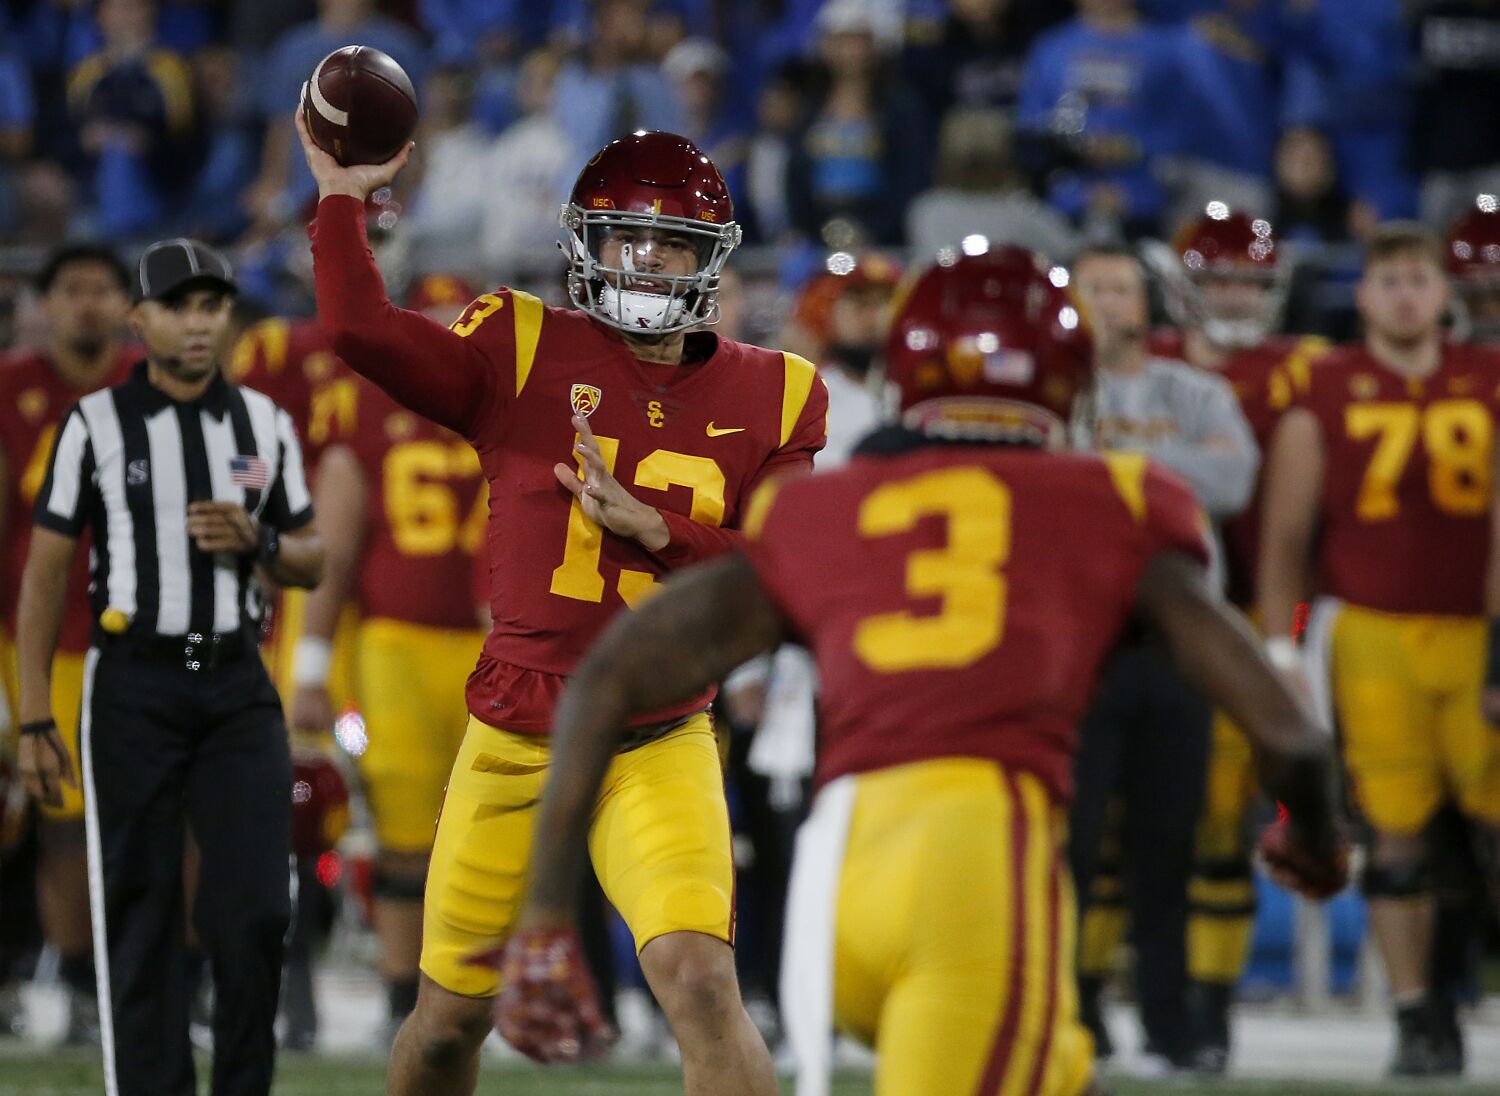 Can Caleb Williams have another Heisman moment? What to watch for in USC-Notre Dame